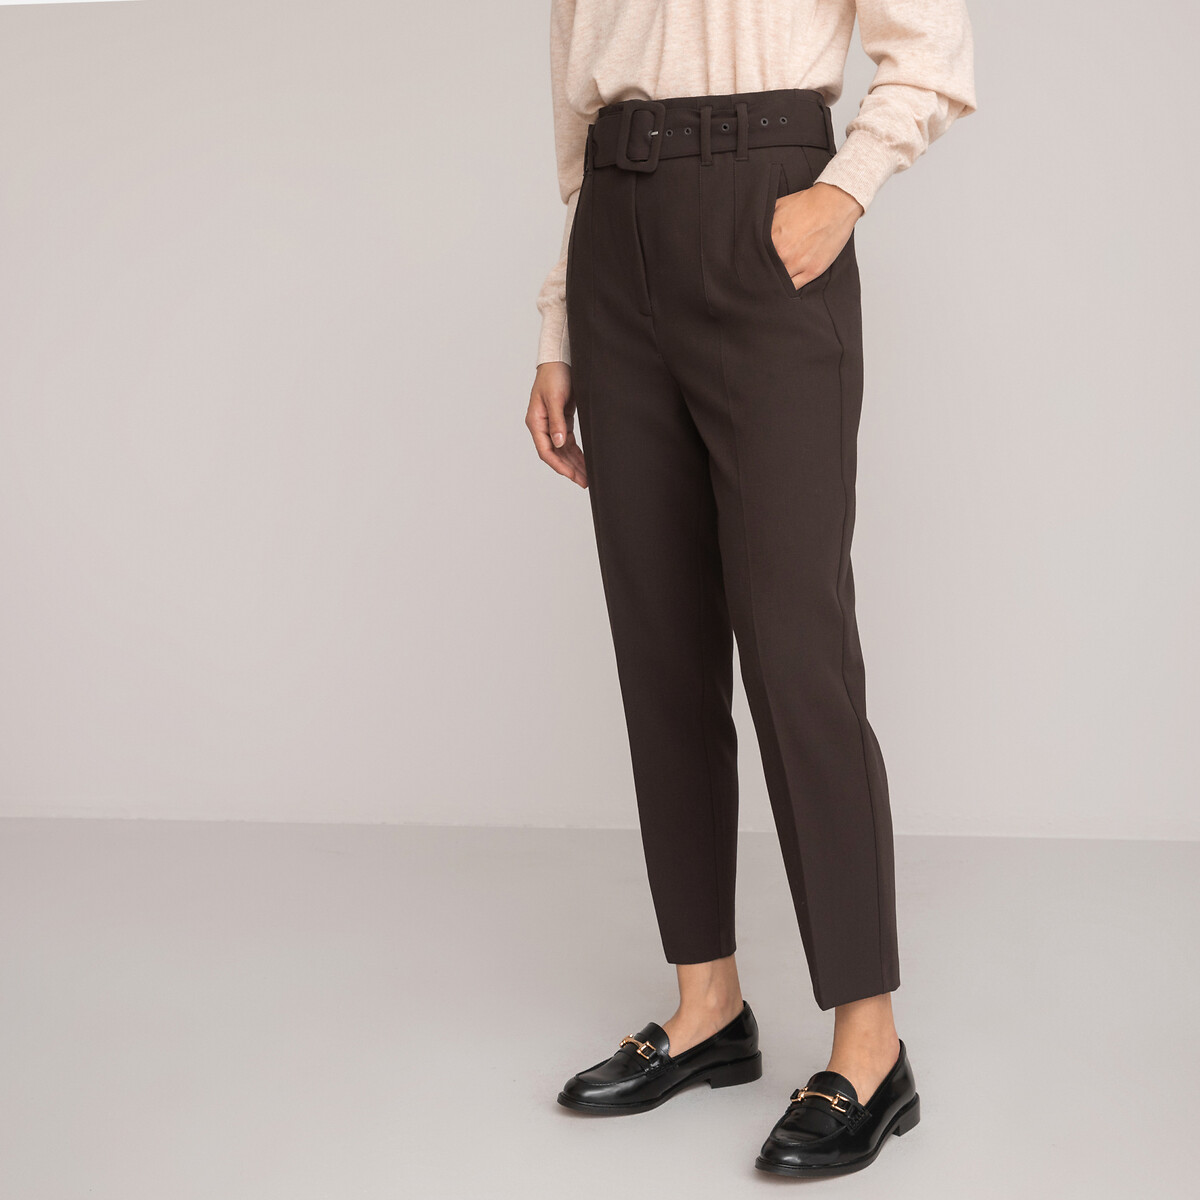 Belted Cigarette Trousers, Length 26"